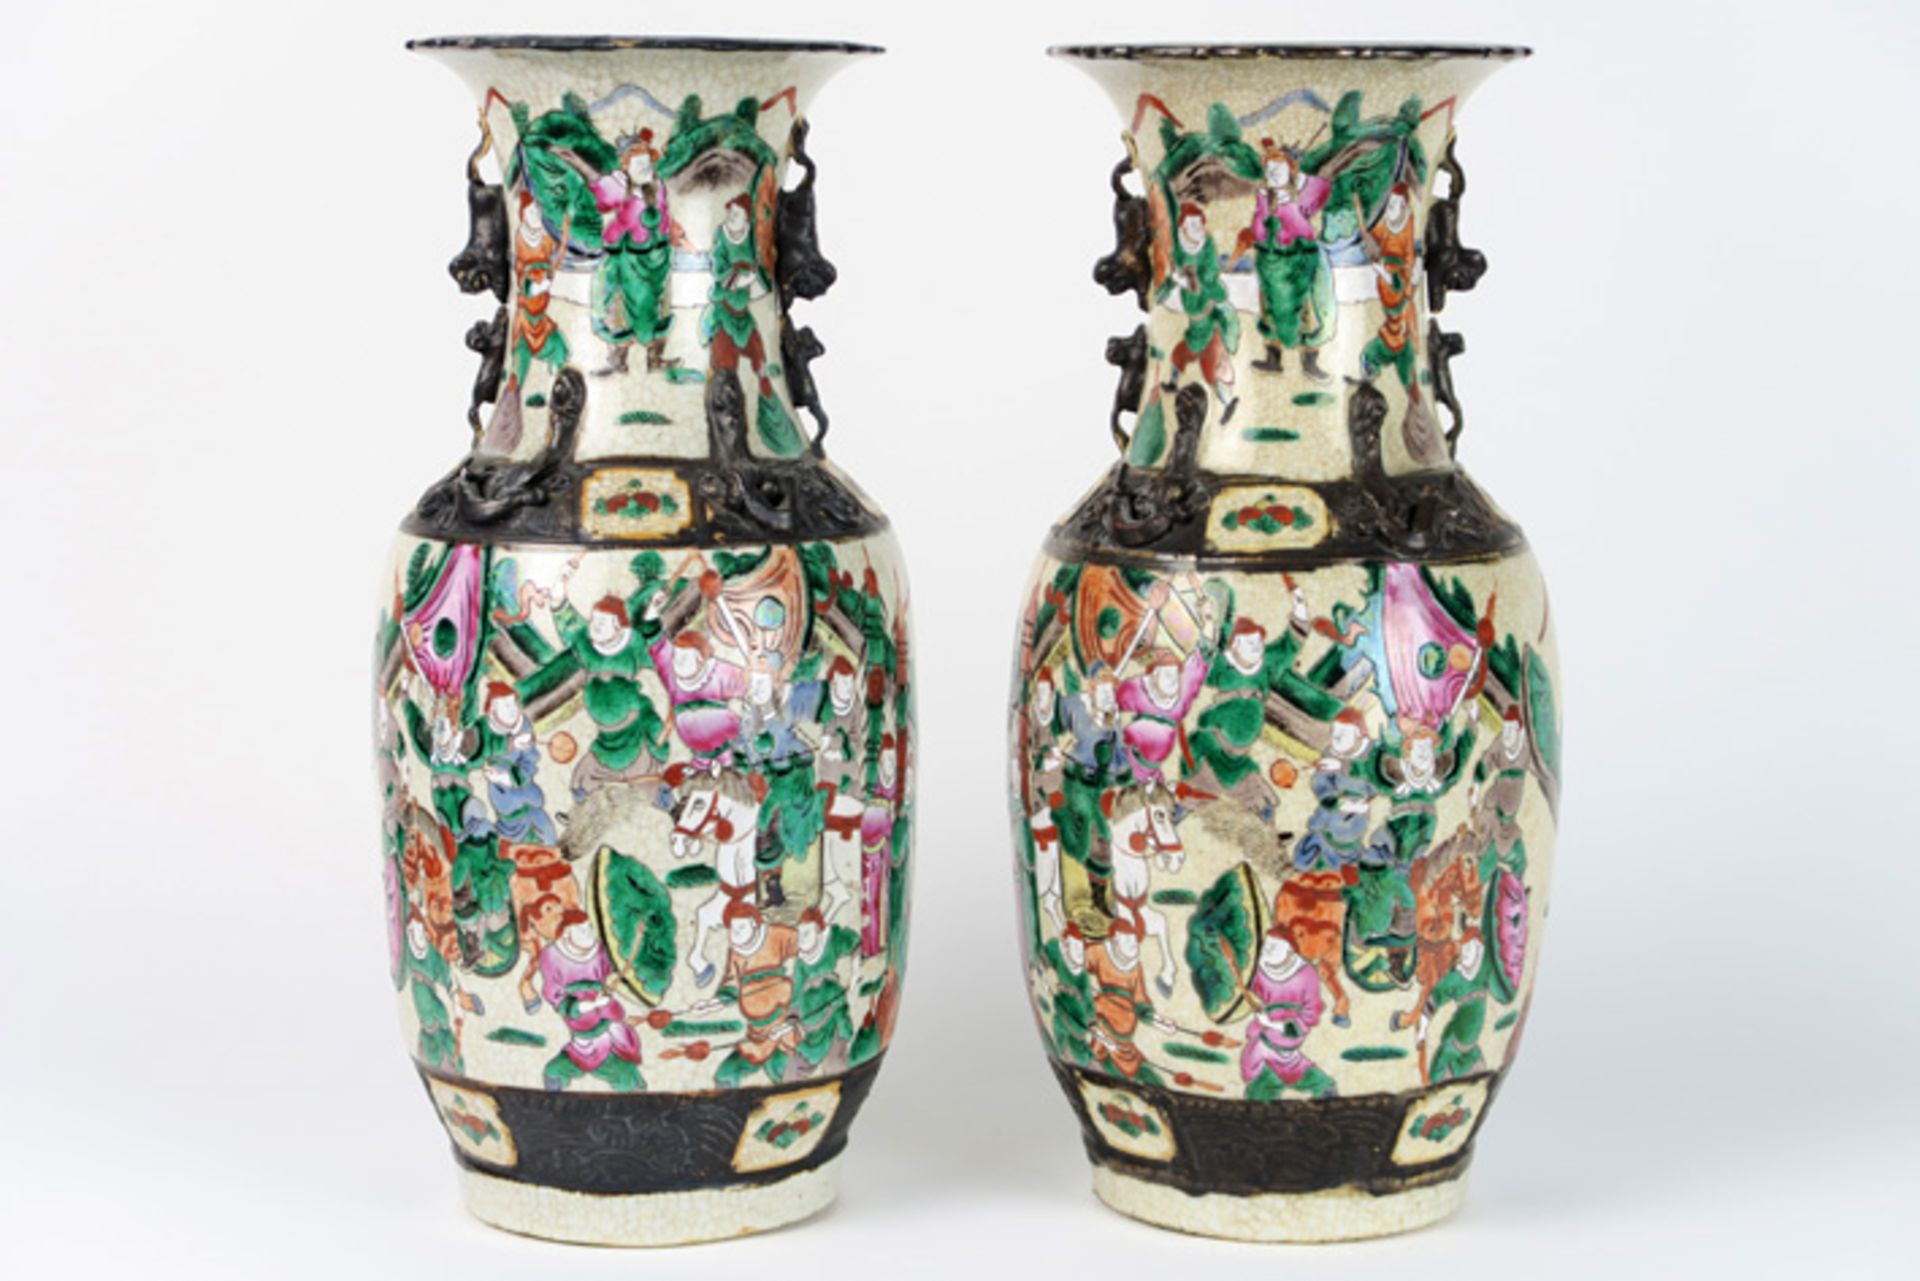 pair of antique Chinese vases in Nankin porcelain with polychrome decor Paar antieke Chinese vazen